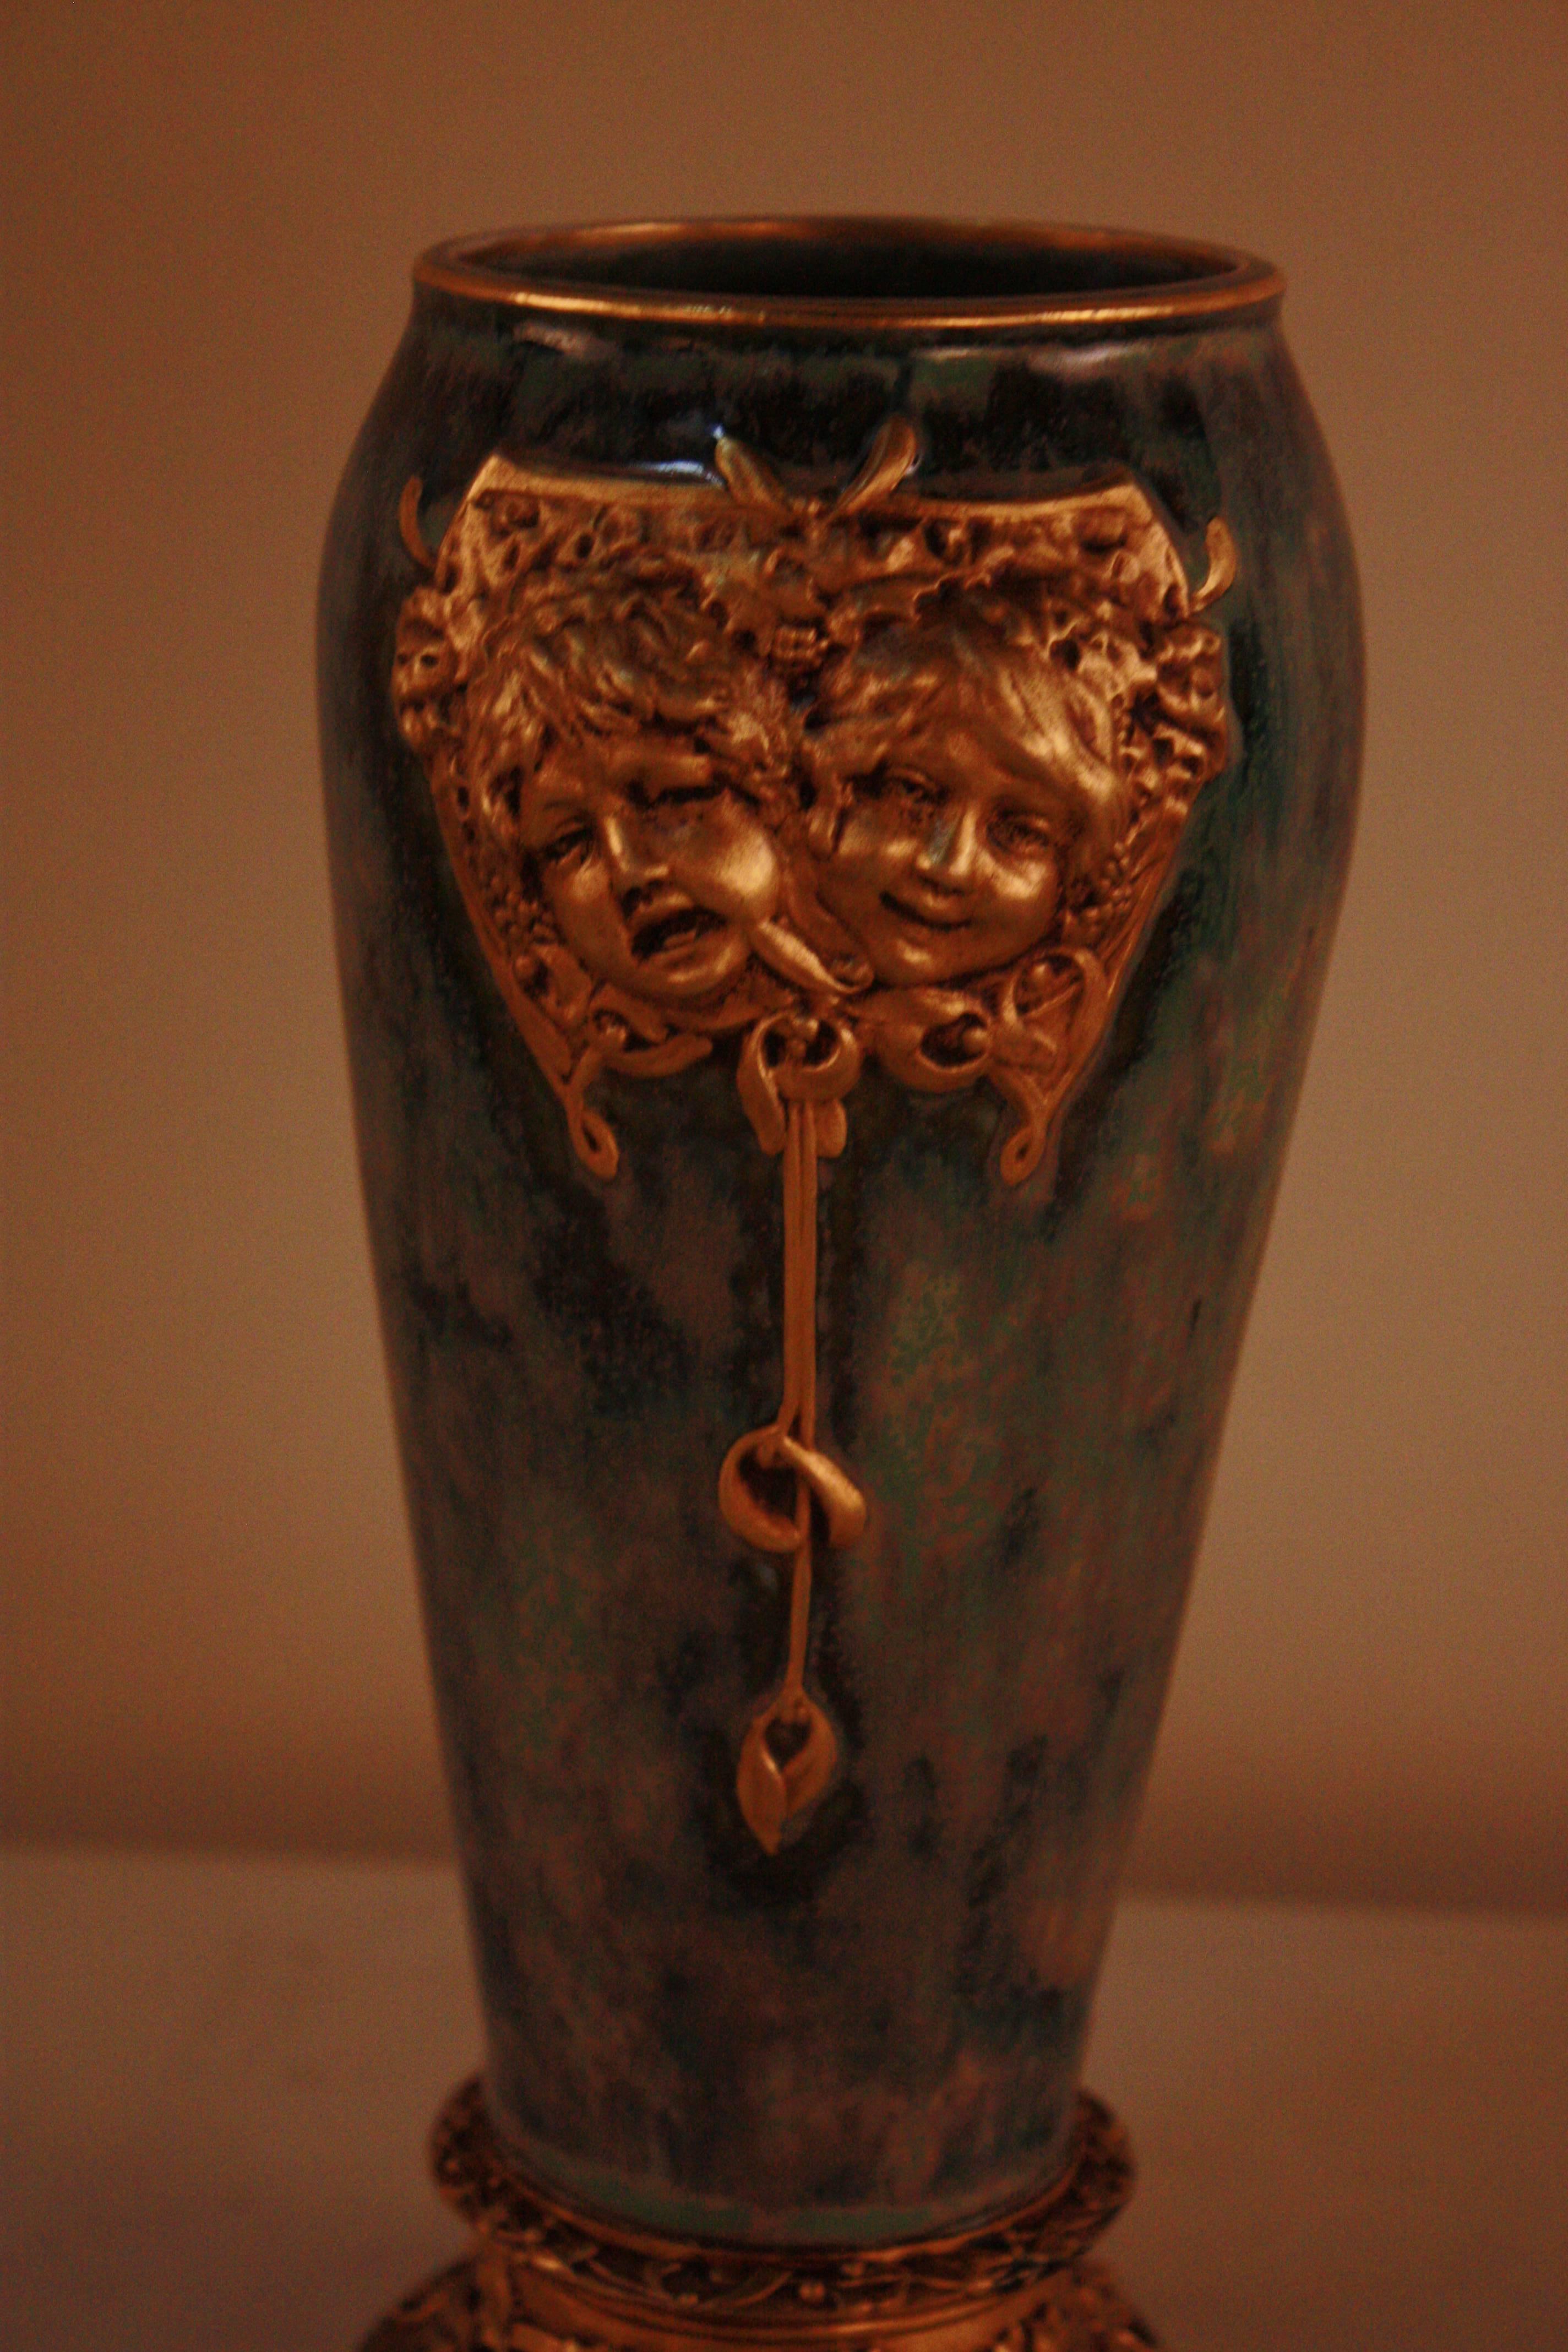 Multi-color glazed porcelain vase mounted on doré bronze base by Paul Louchet, Paris. Note the artist seal on the rear of this piece, seen in image six, as well as the detail in the glaze. 